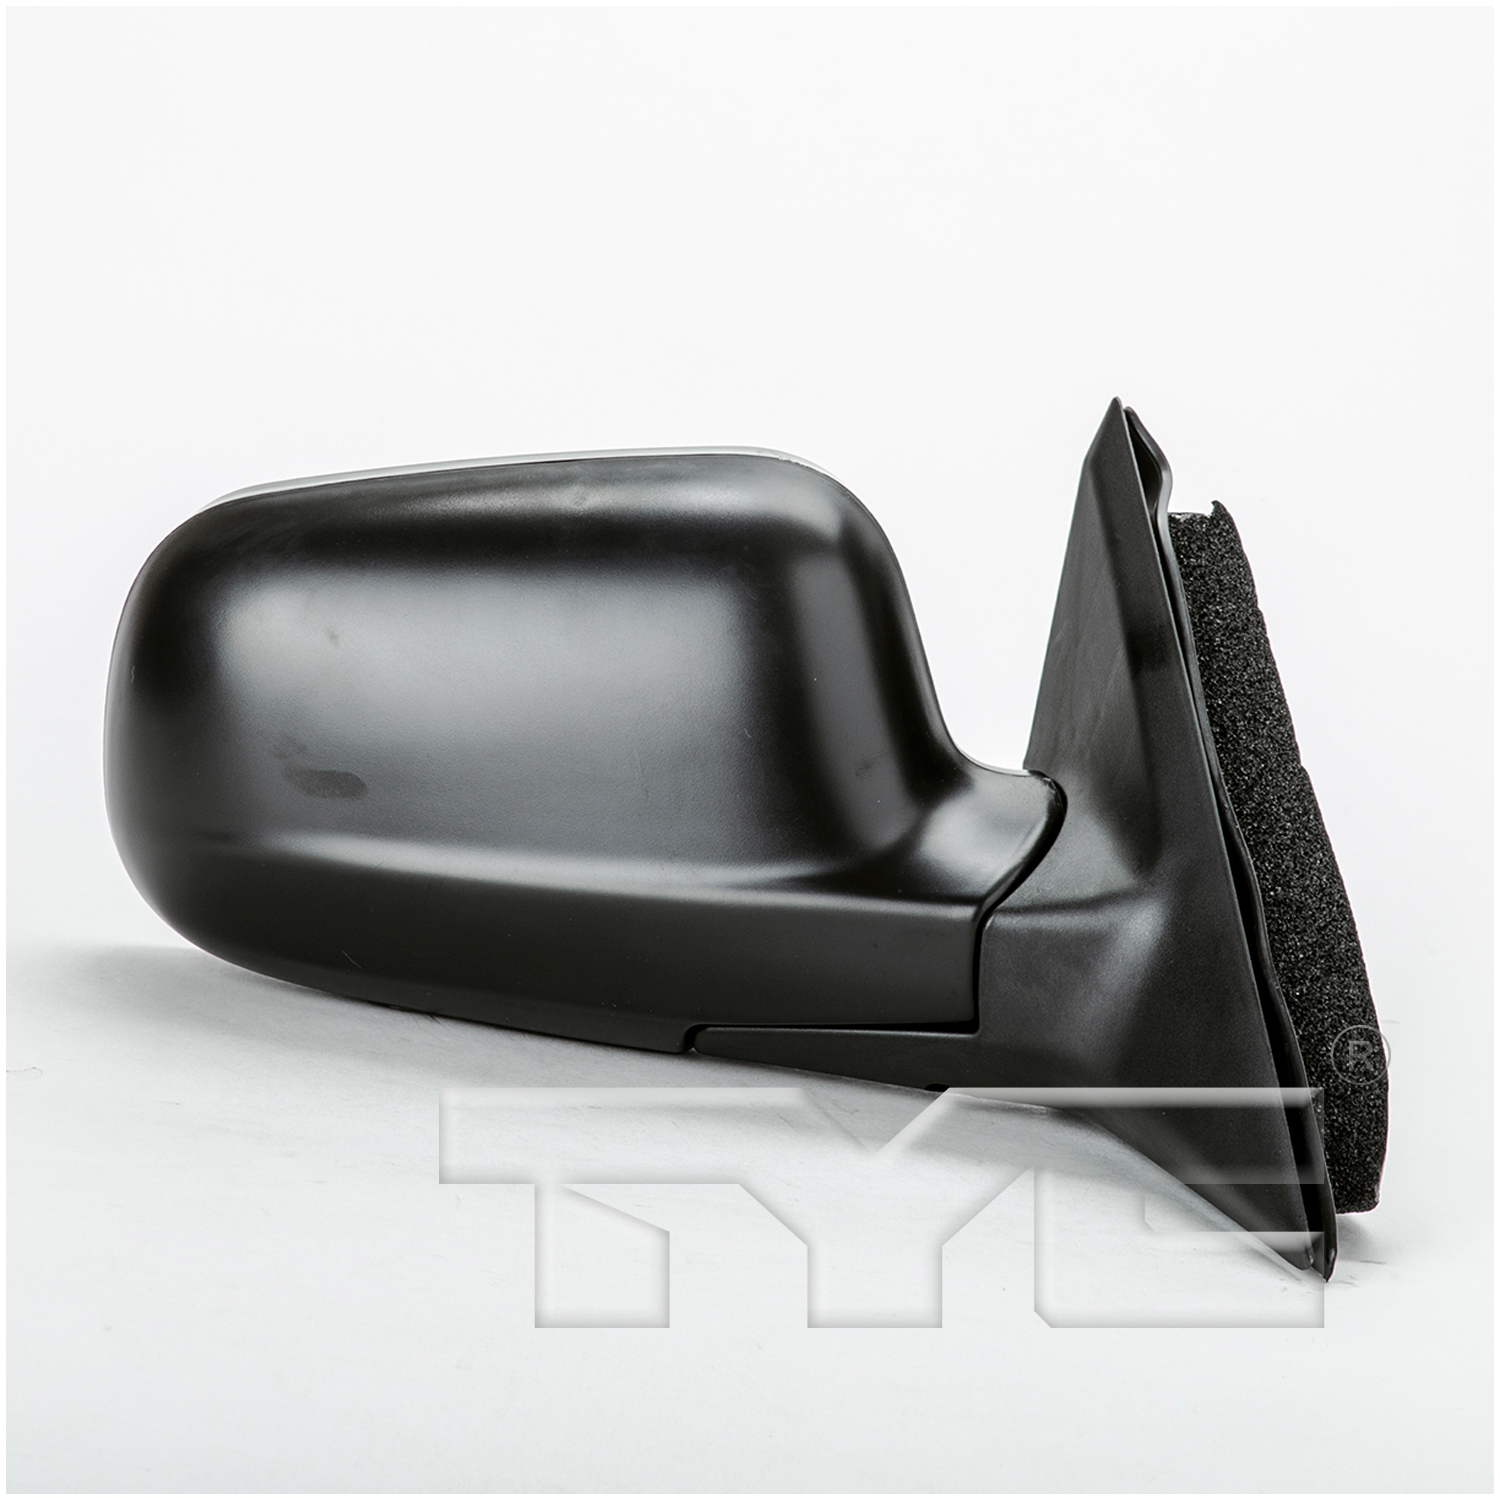 Aftermarket MIRRORS for HONDA - ACCORD, ACCORD,94-97,RT Mirror outside rear view